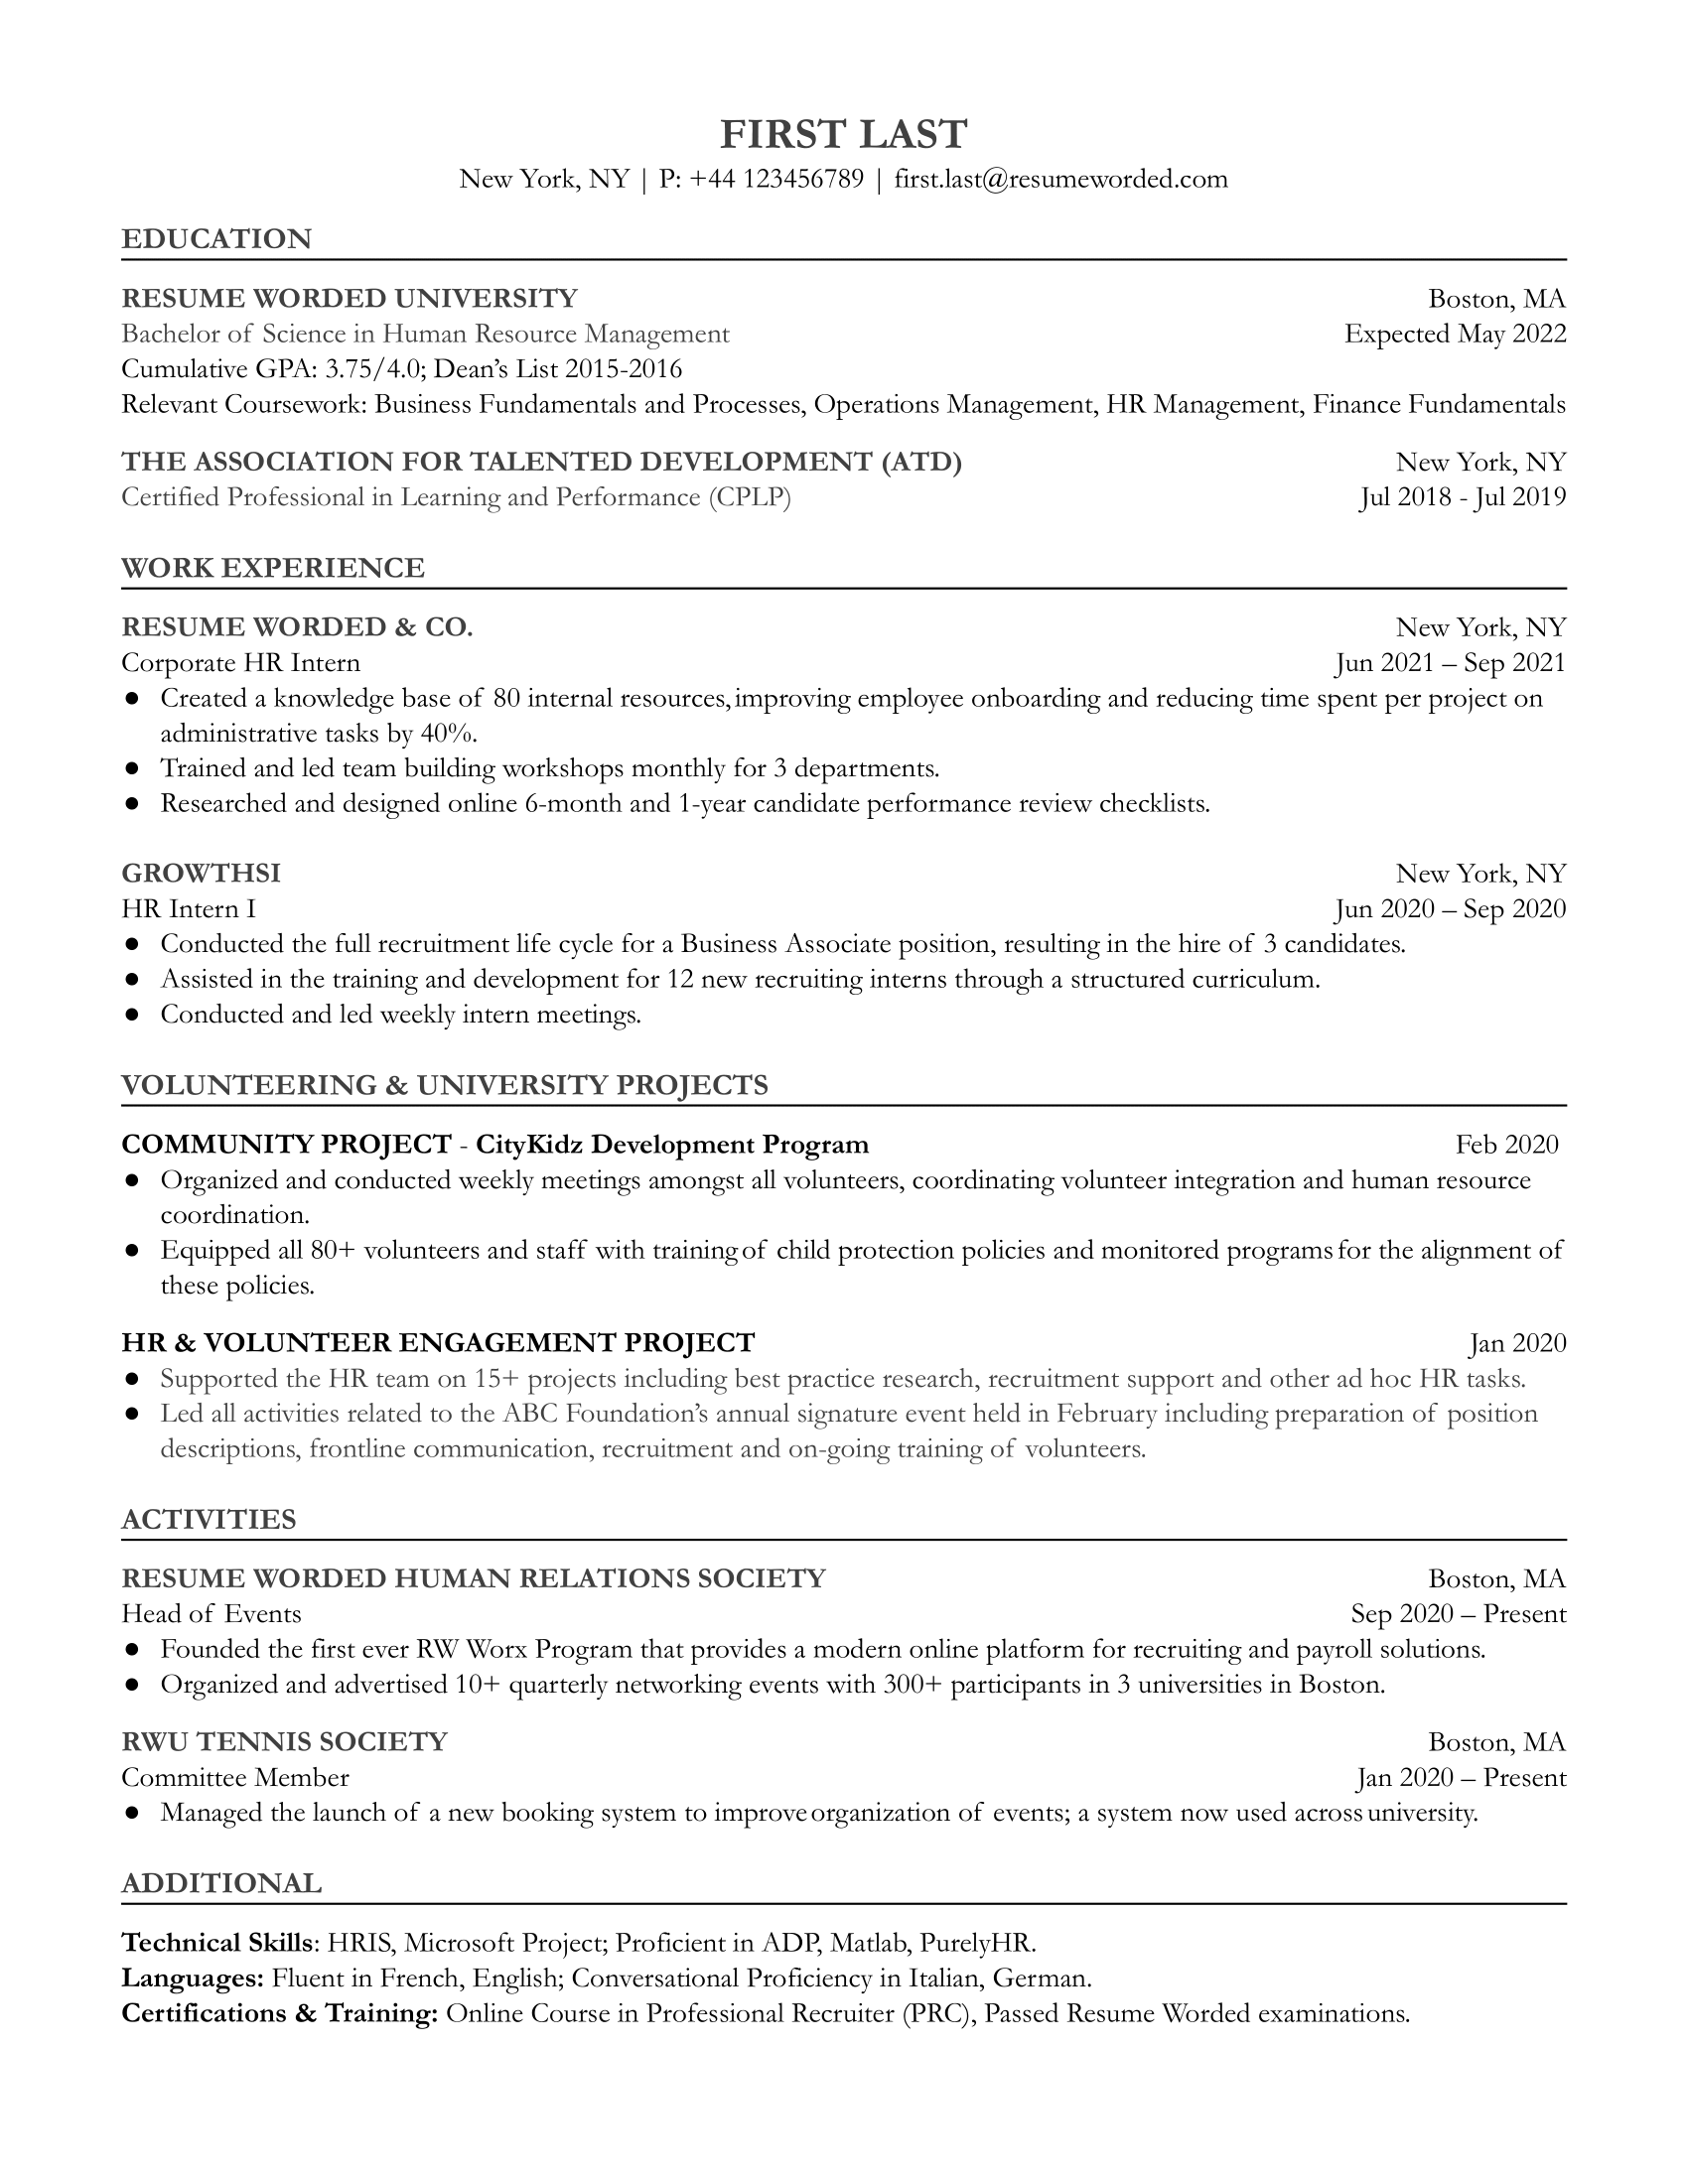 Entry Level Human Resources (HR) Resume Template + Example